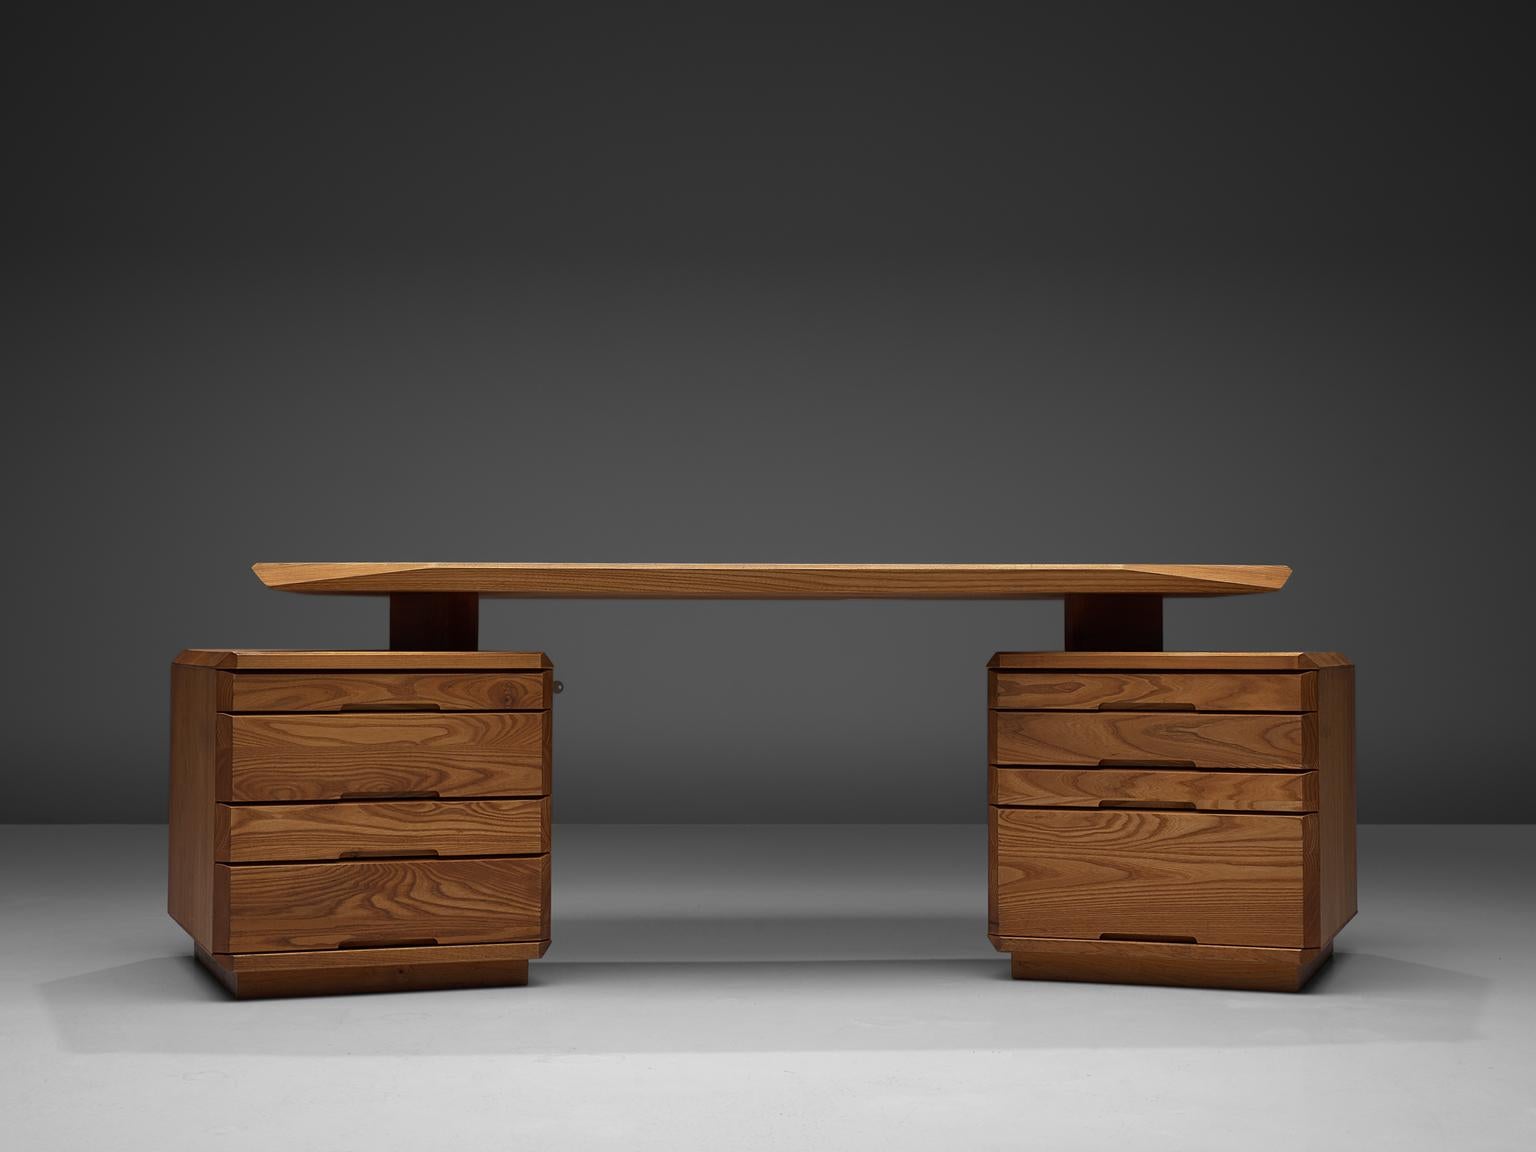 Pierre Chapo, B40 desk, elm, France, 1960s.

Characteristic desk by French designer and carpenter Pierre Chapo. Eye-catching detail is the beautiful carved tabletop, with slanted sides and corners. The tabletop rests on two cabinets that are